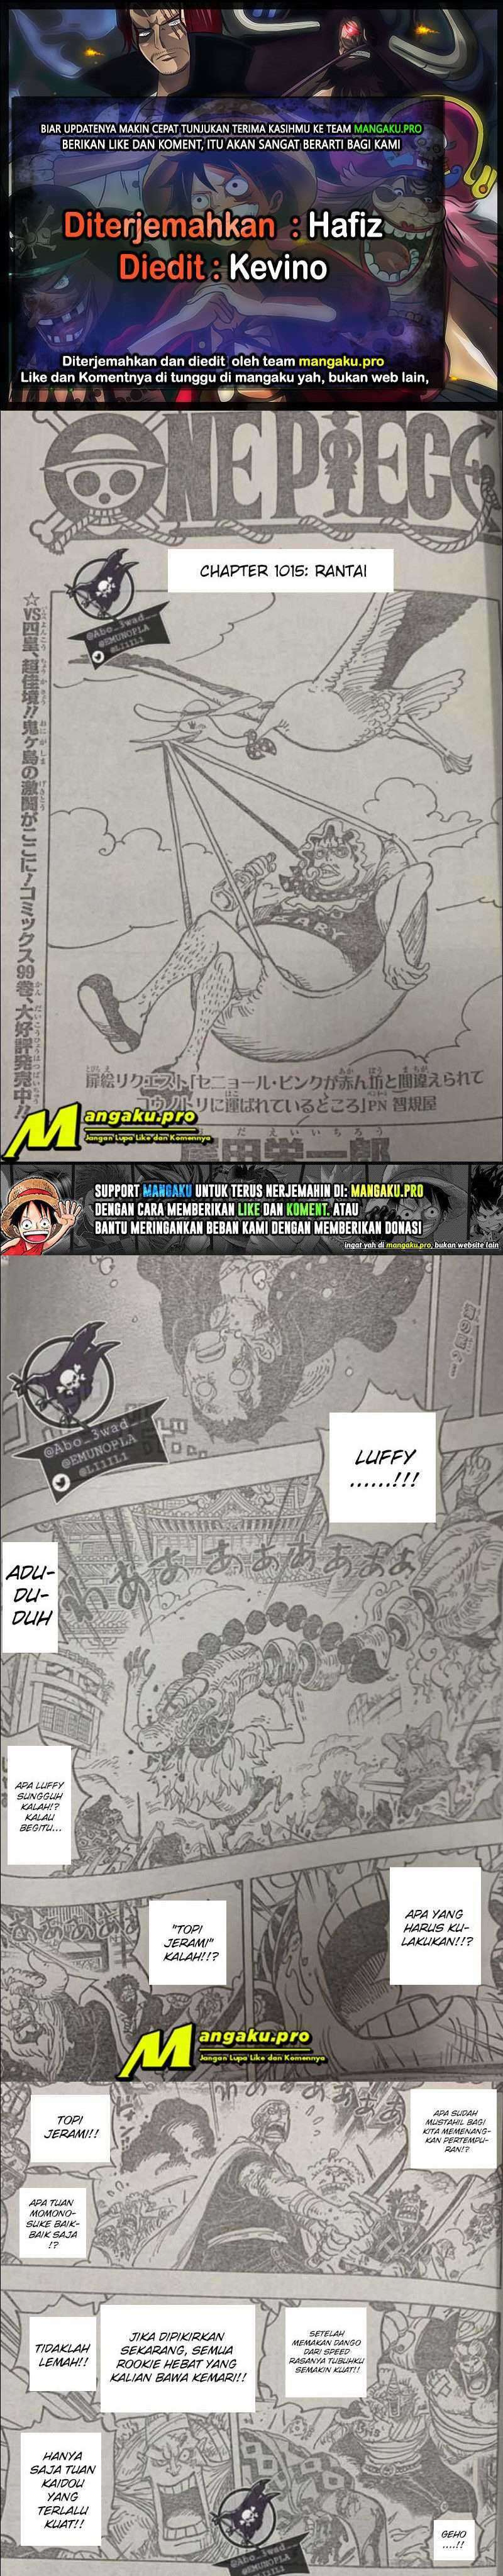 One Piece Chapter 1015 Lq - 37